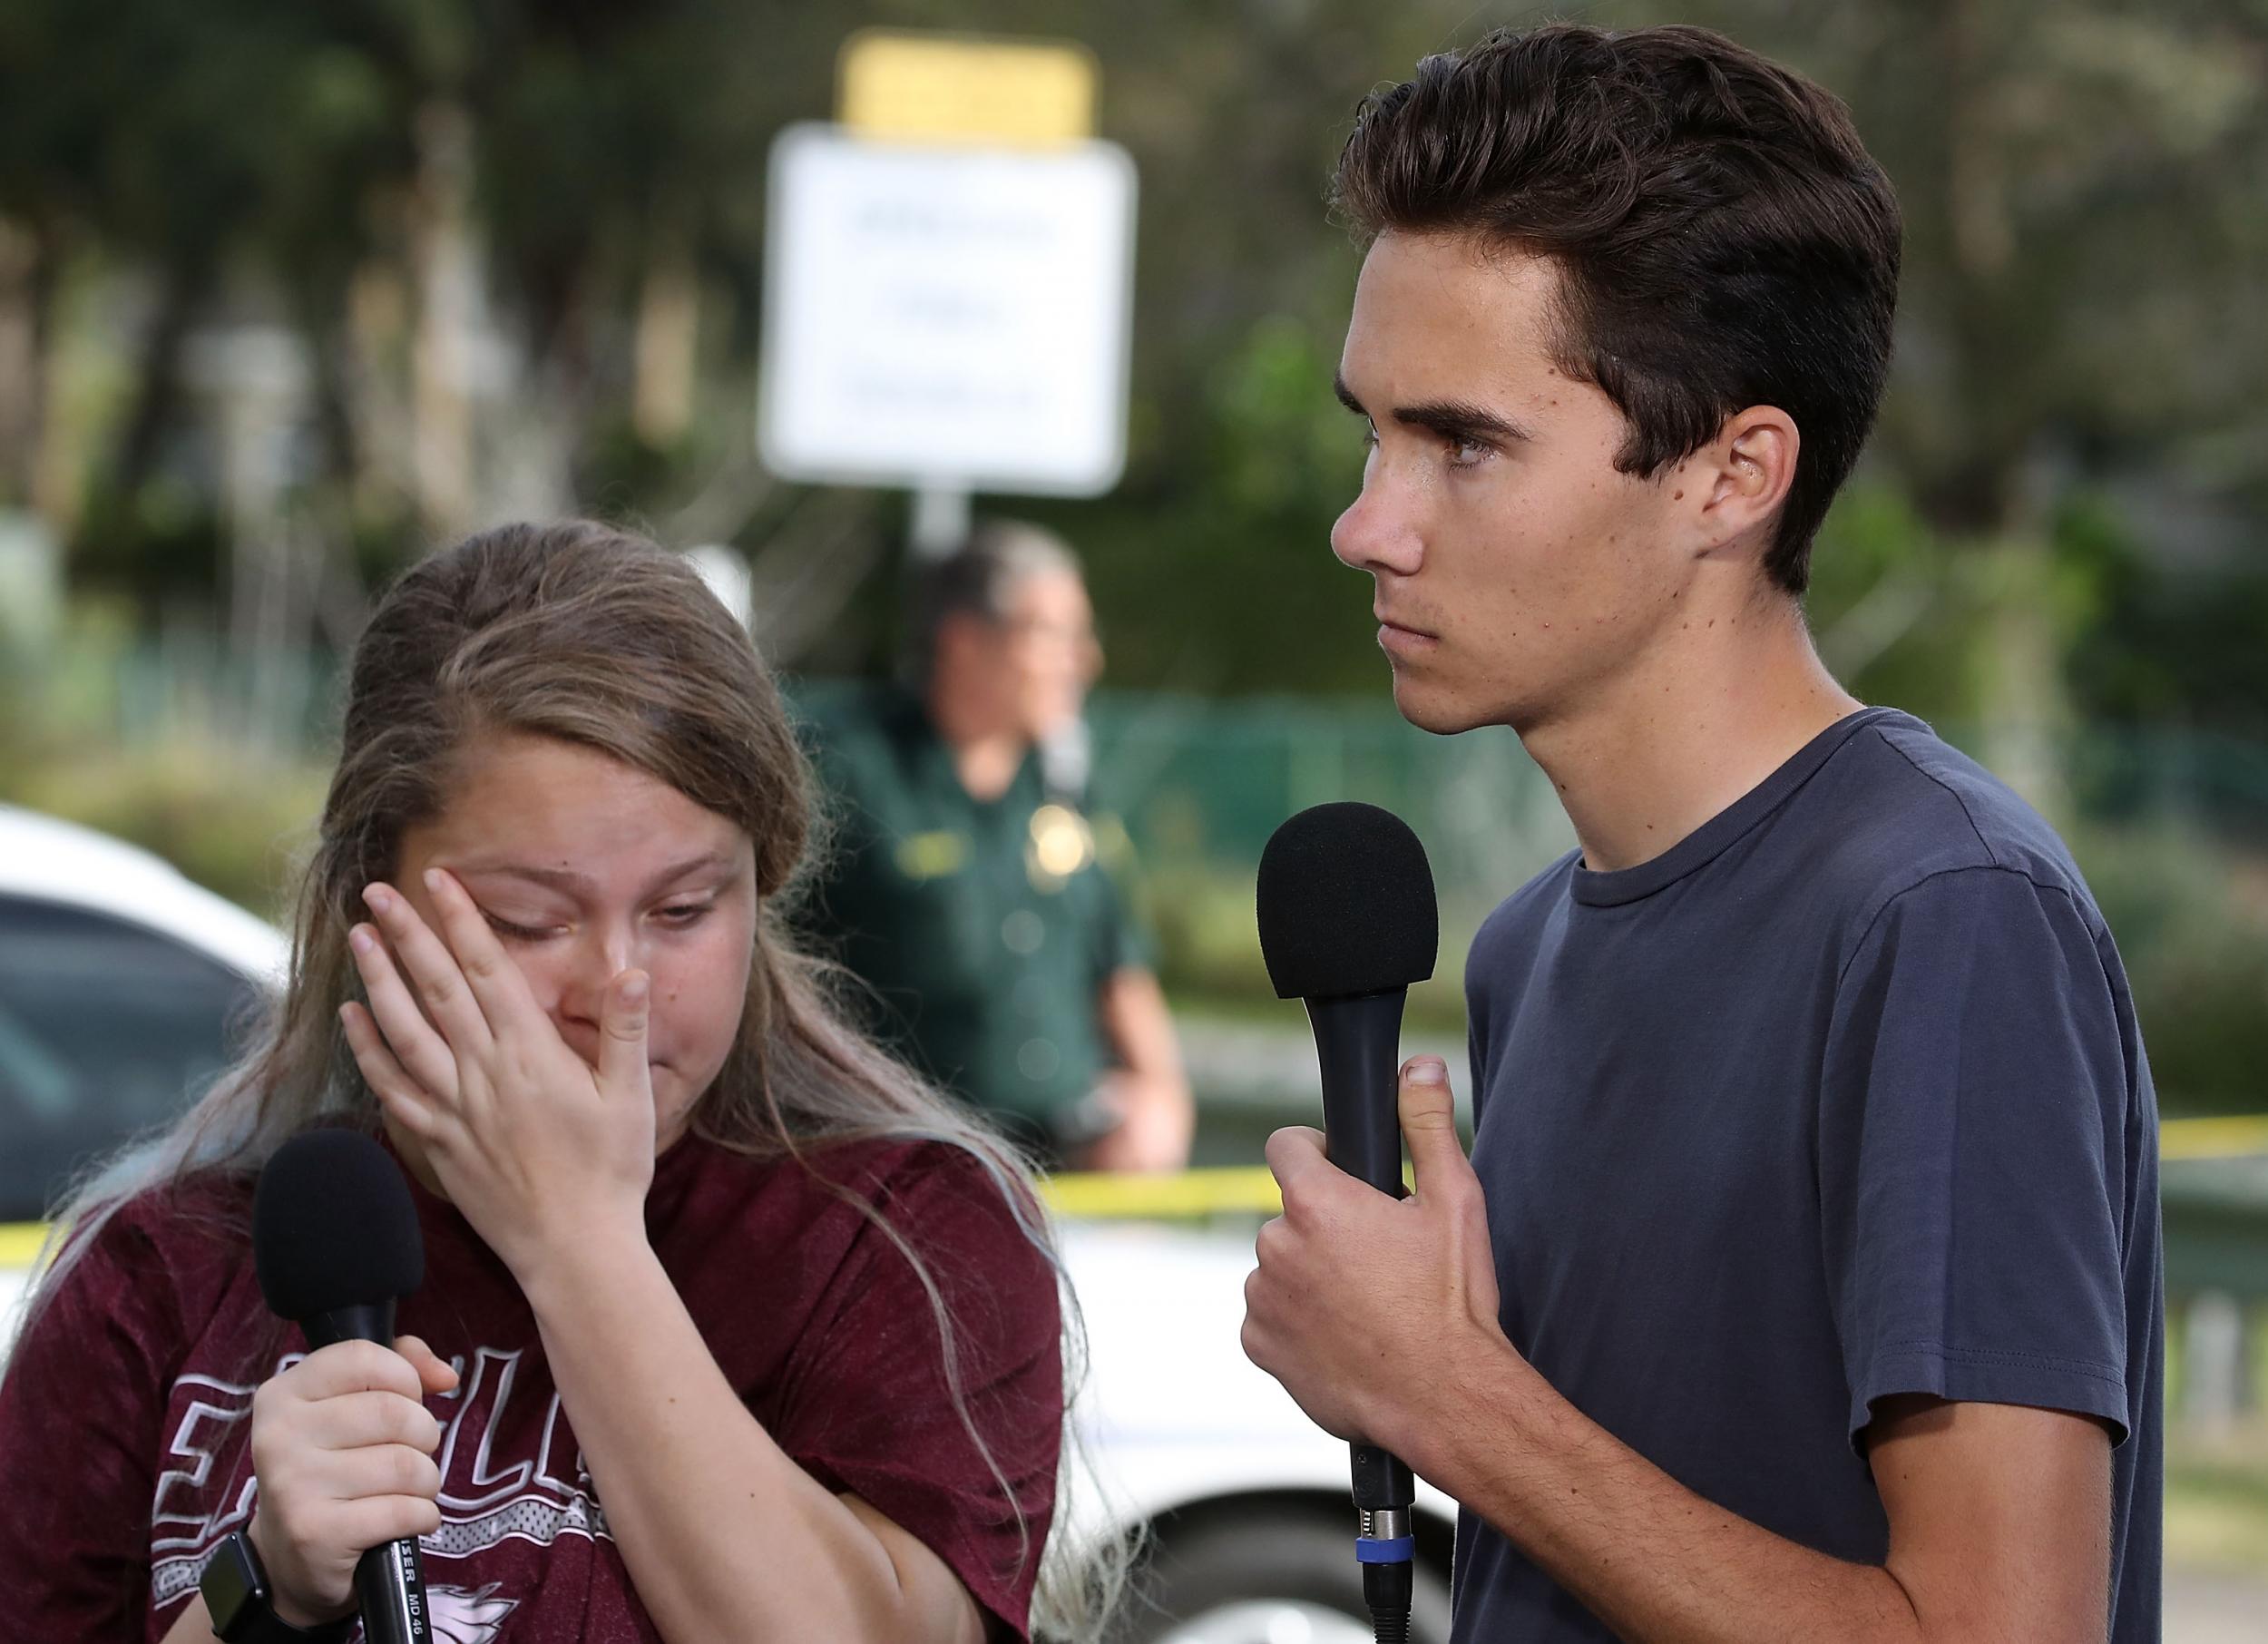 David Fogg pictures peaking after the Florida school shooting